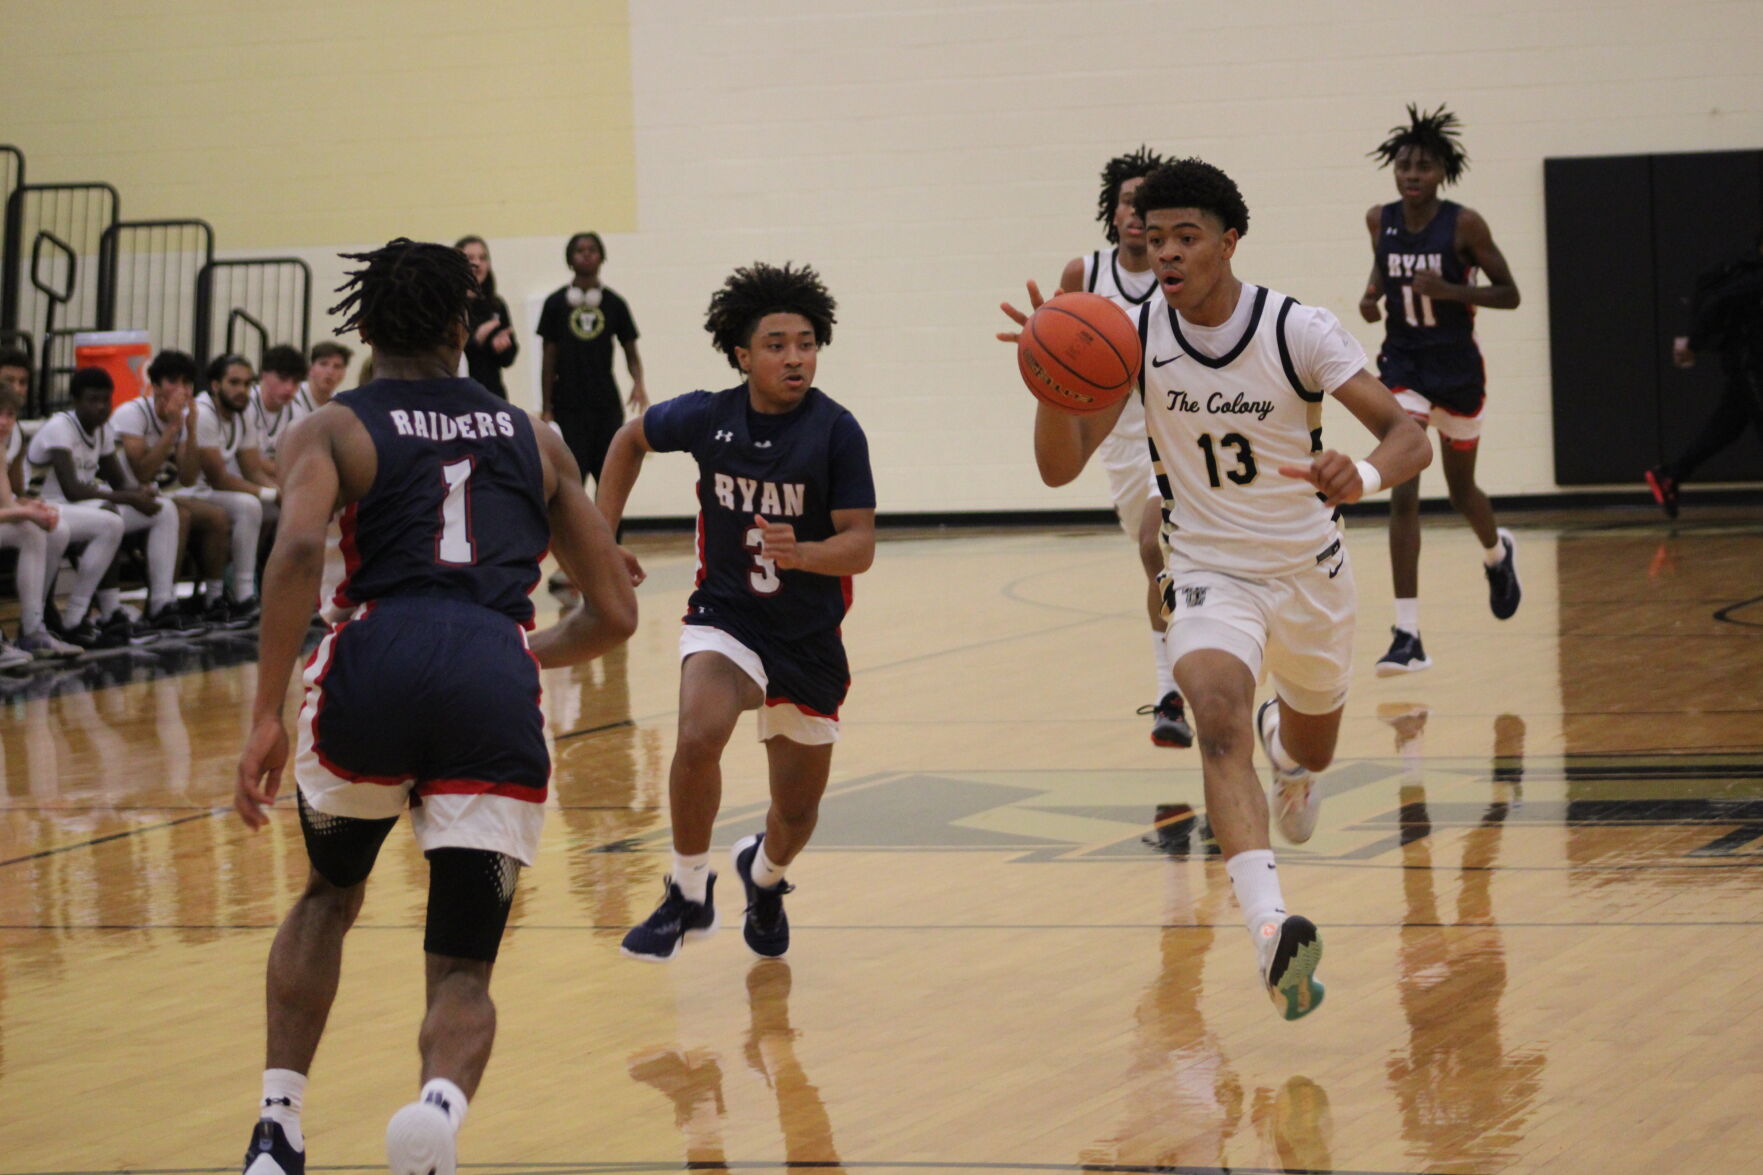 Denton County Boys Basketball Roundup: The Colony uses big second quarter to cruise past Creekview